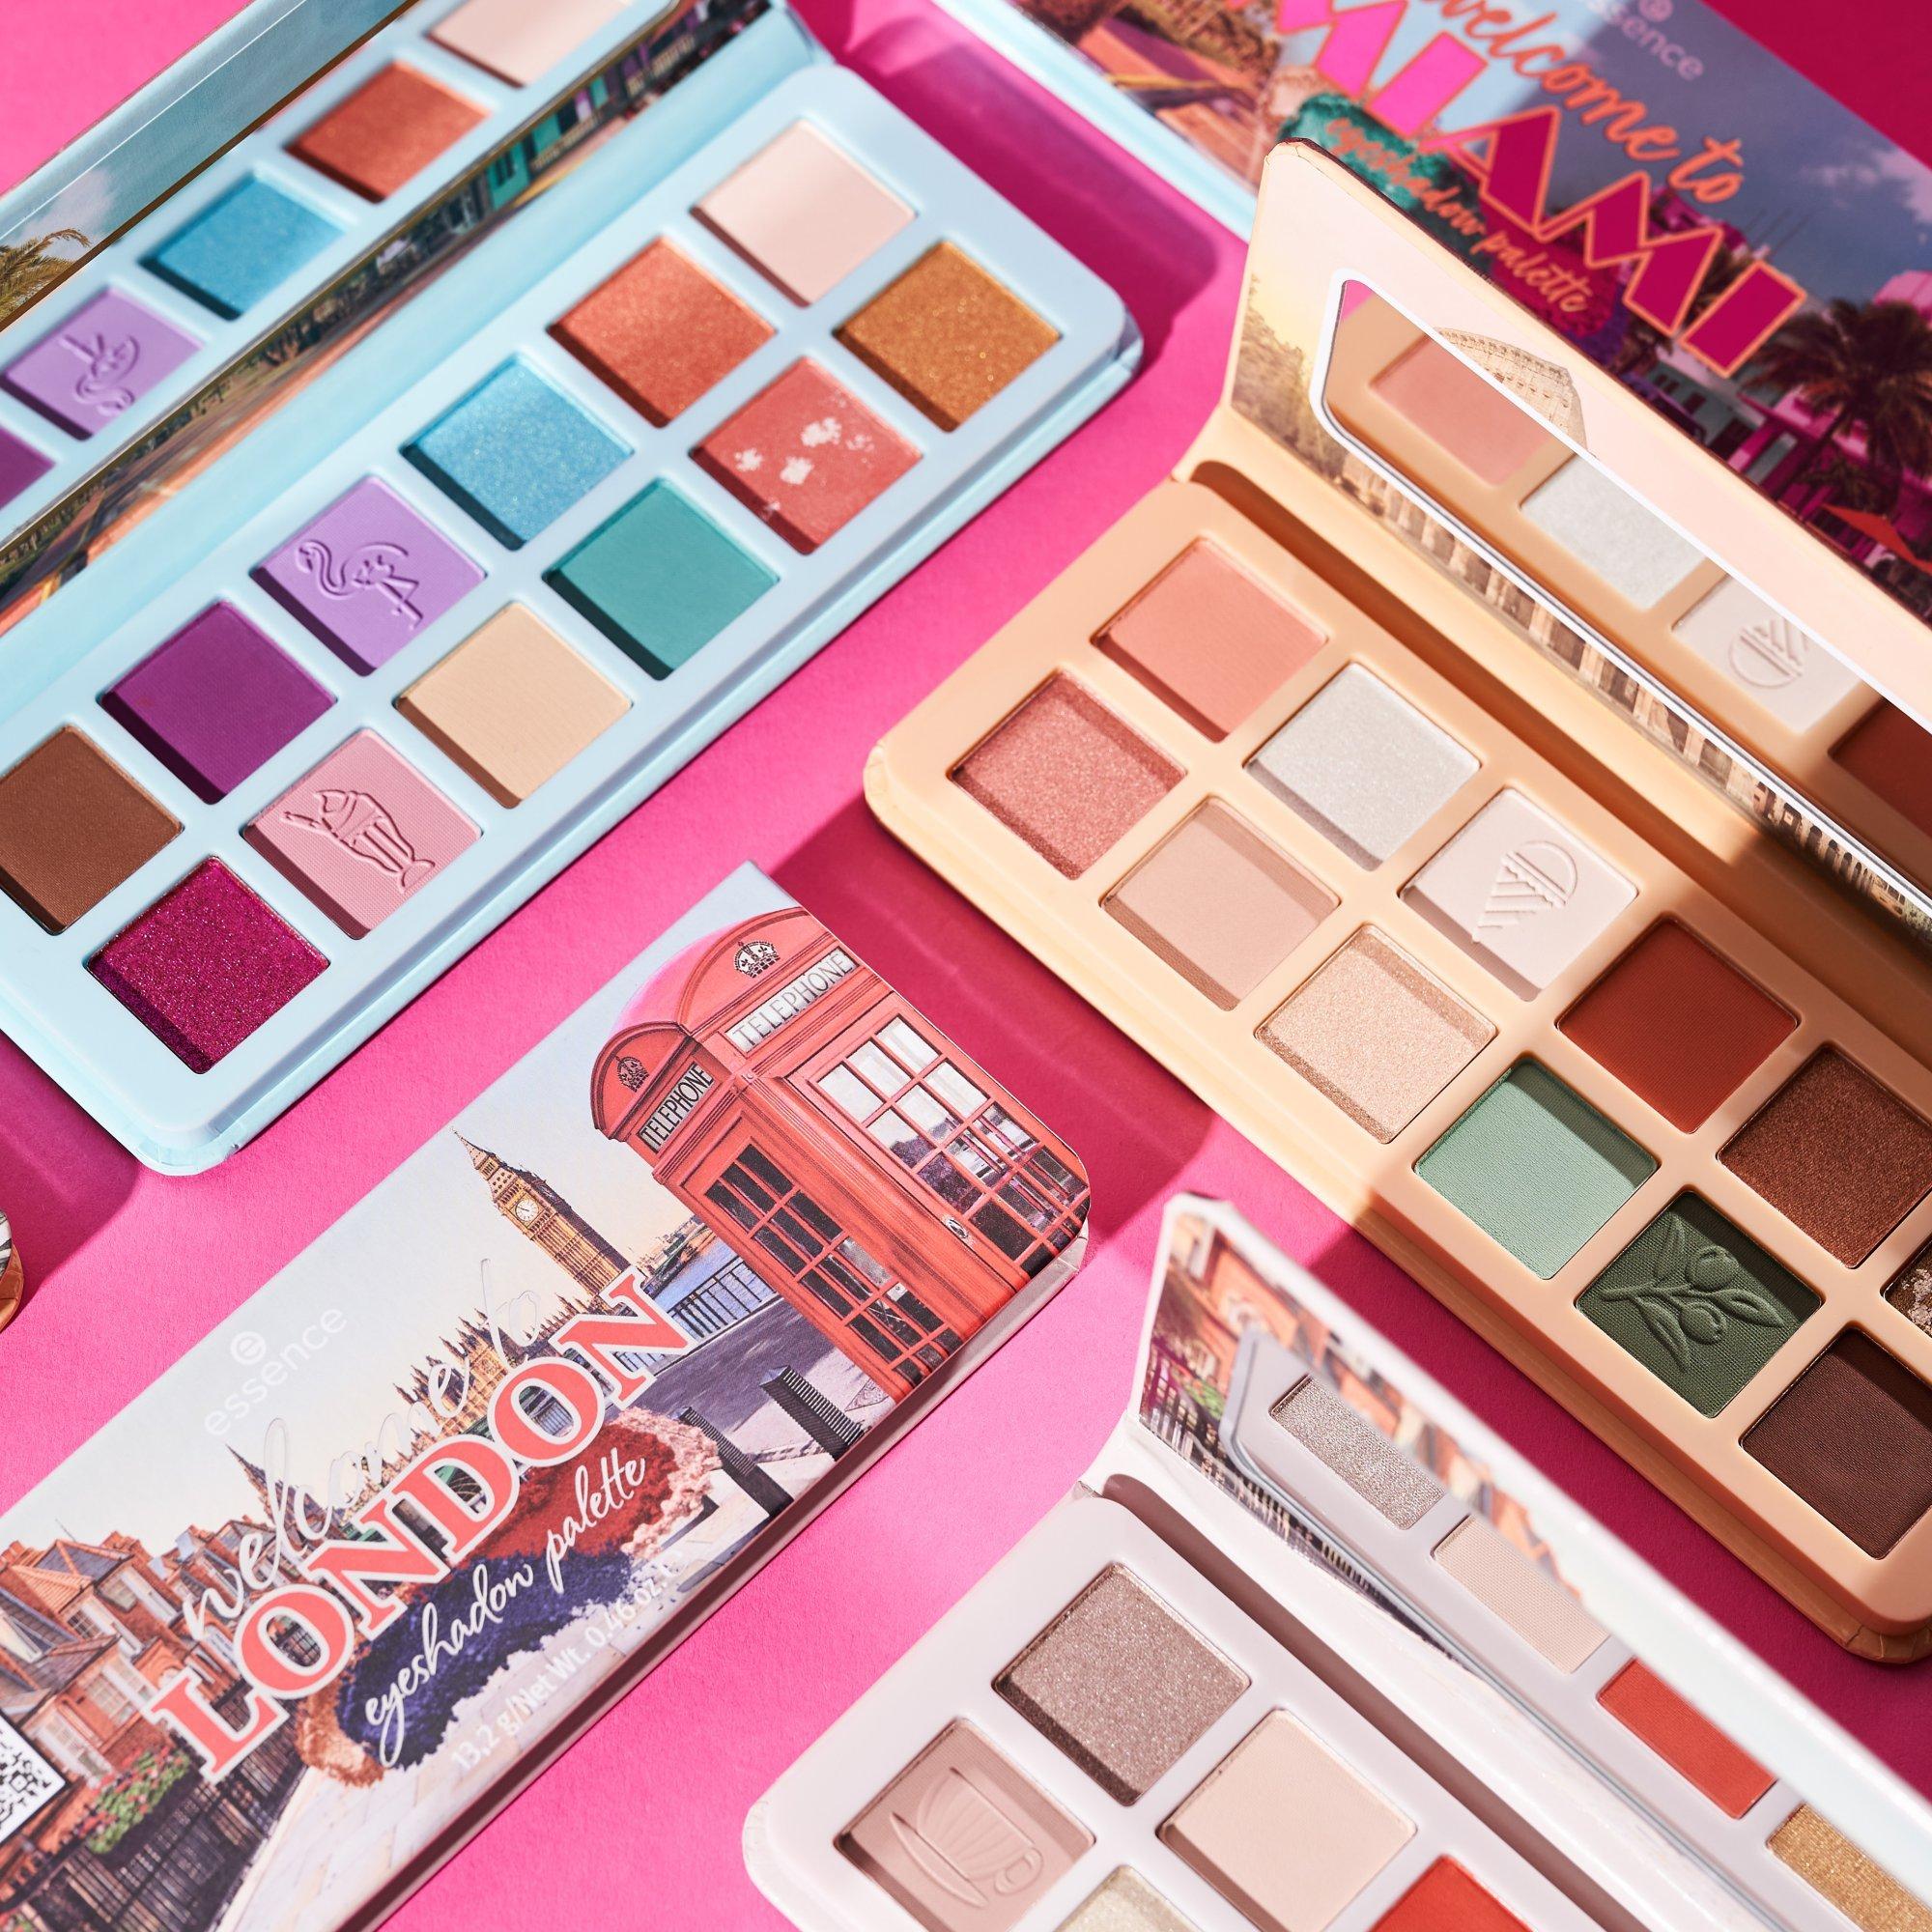 welcome to MIAMI eyeshadow palette